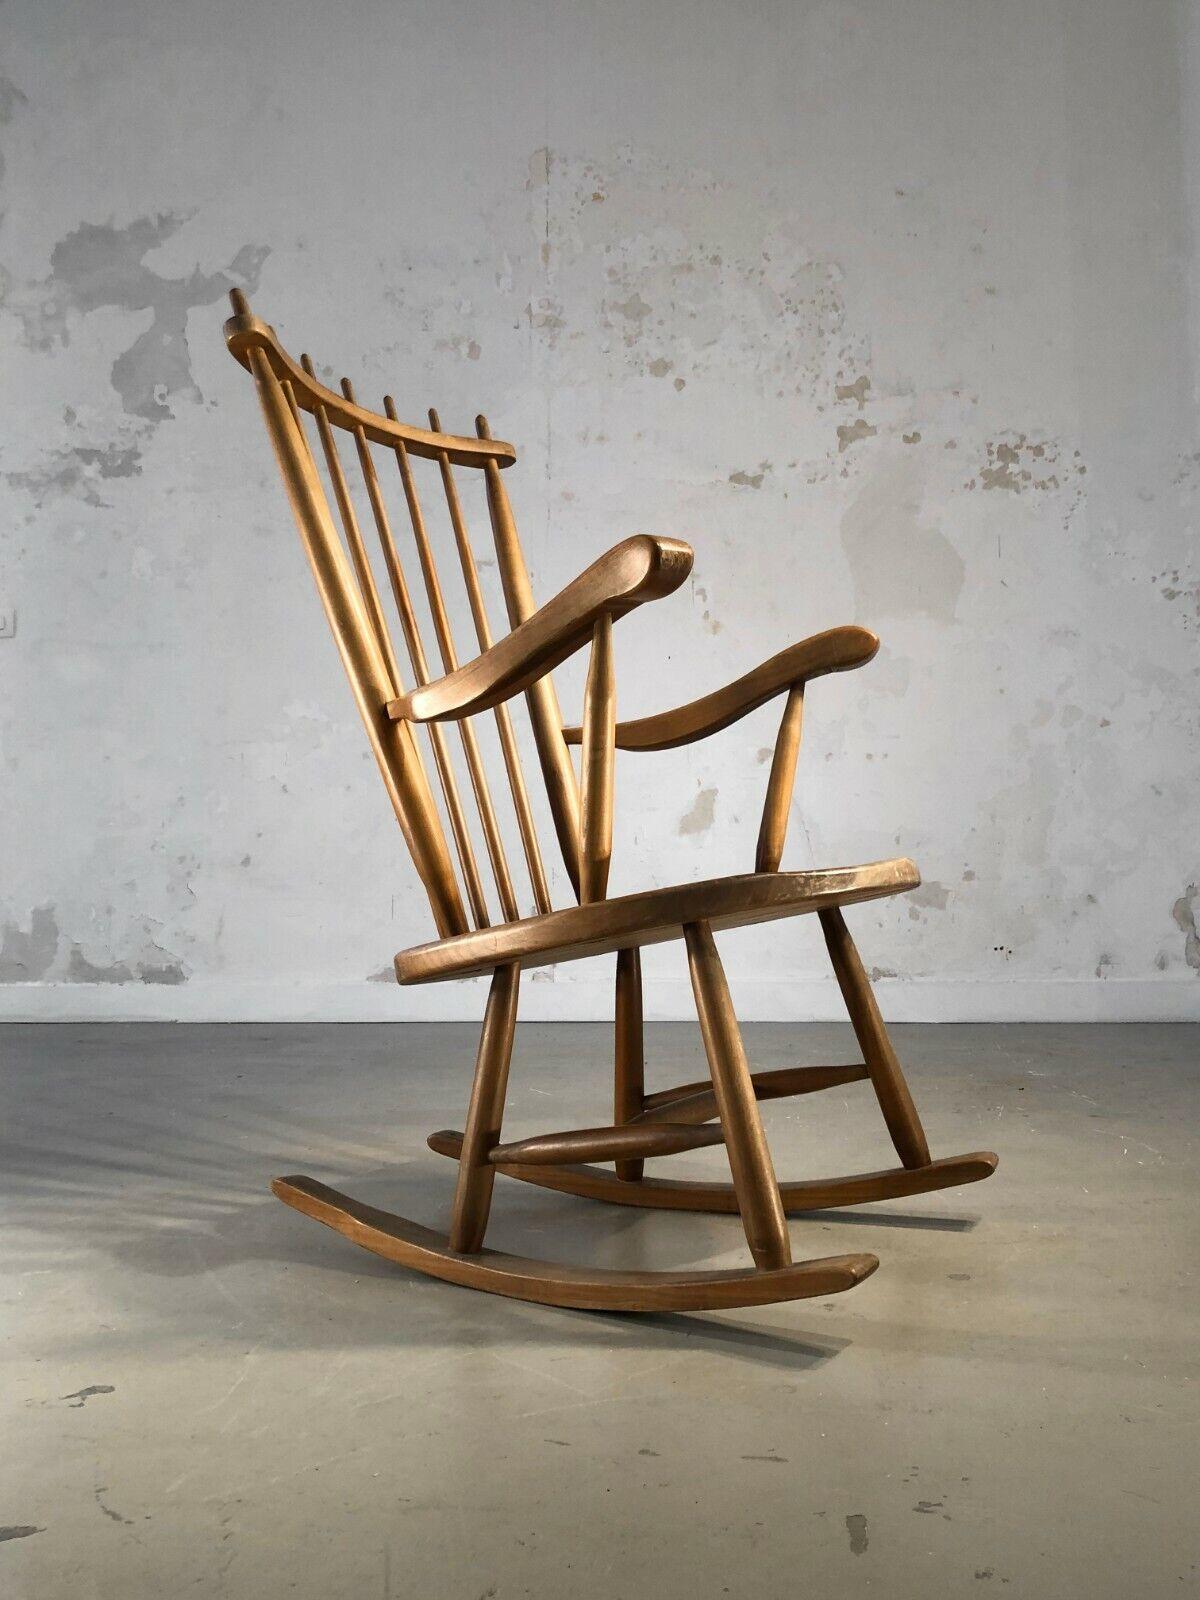 An elegant rocking chair with generous lines, Modernist, Free Form, Reconstruction, of Dansk, Scandinavian inspiration, in carved solid light wood, sometimes attributed to and certainly in the taste of Georges Nakashima, to be attributed, France or